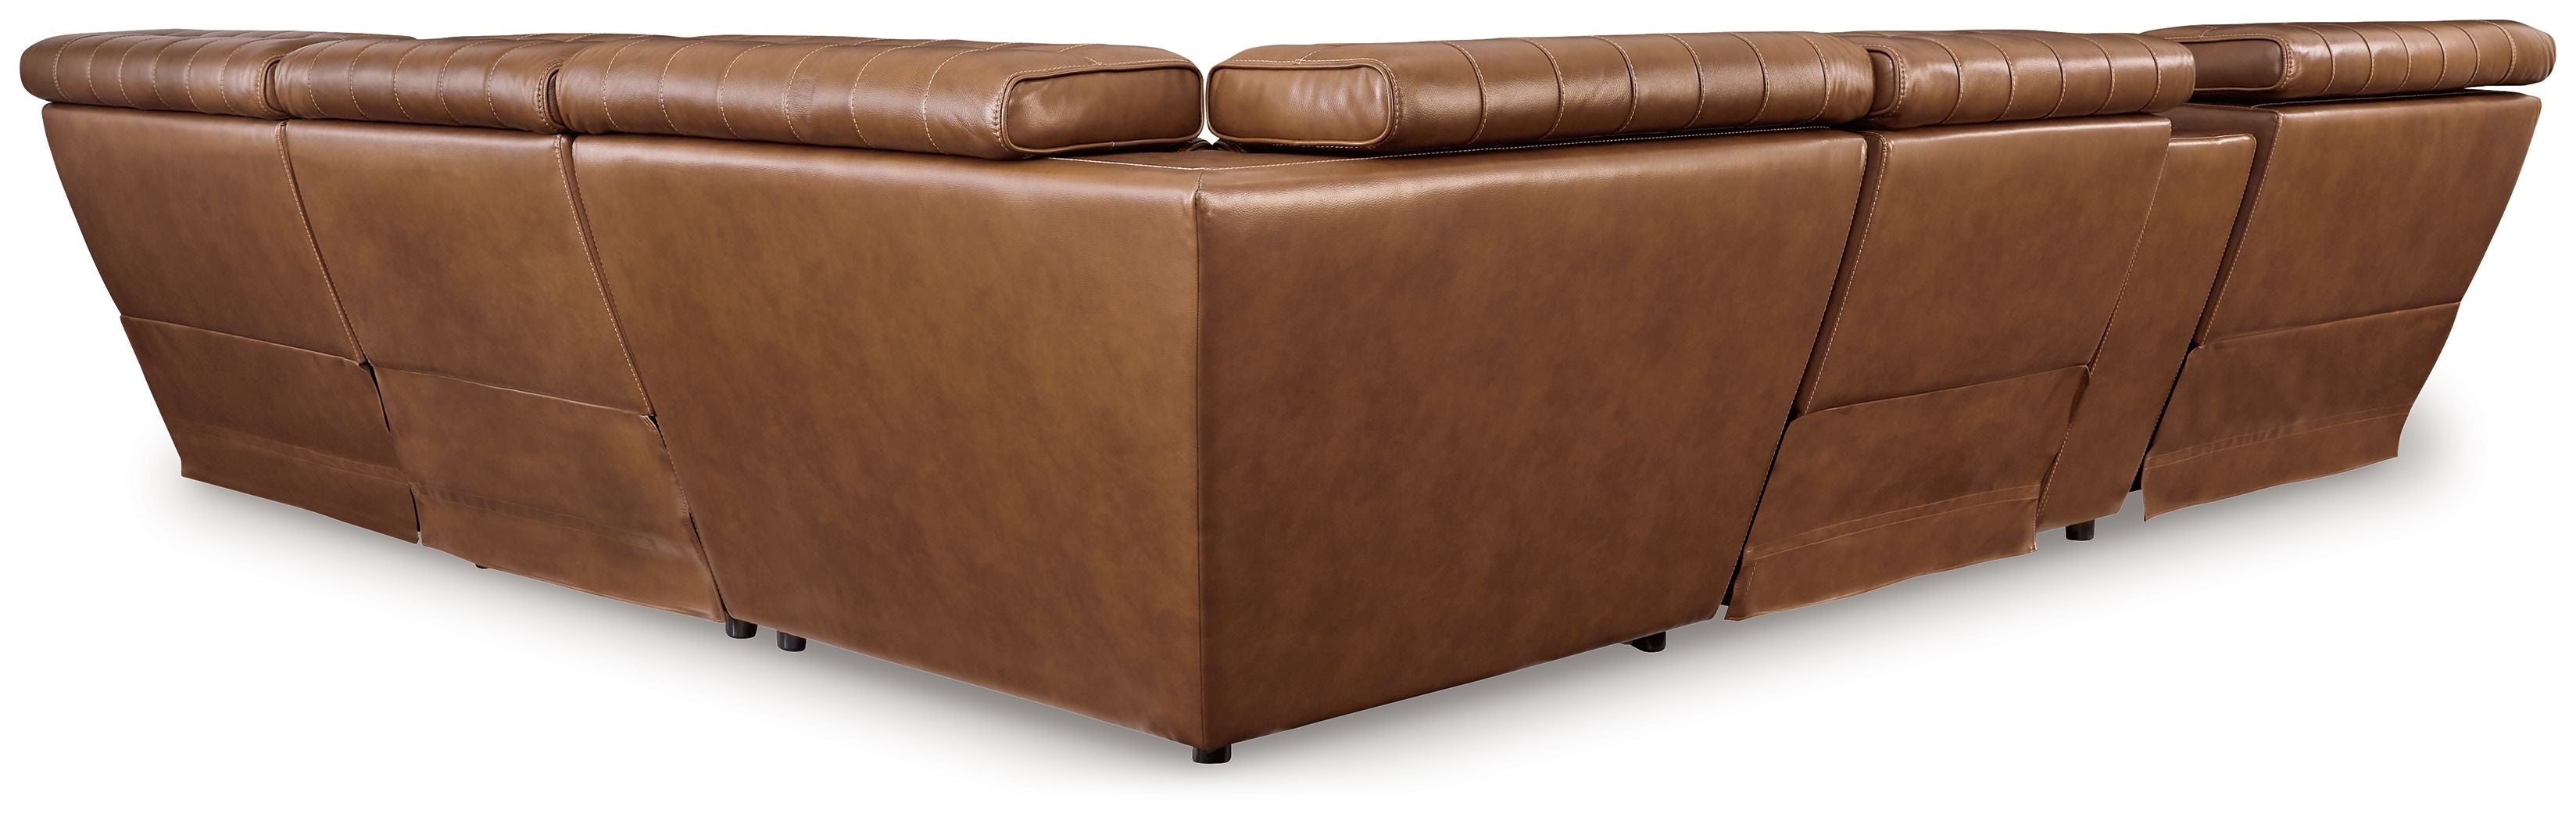 Temmpton Brown Power Leather Reclining Sectional